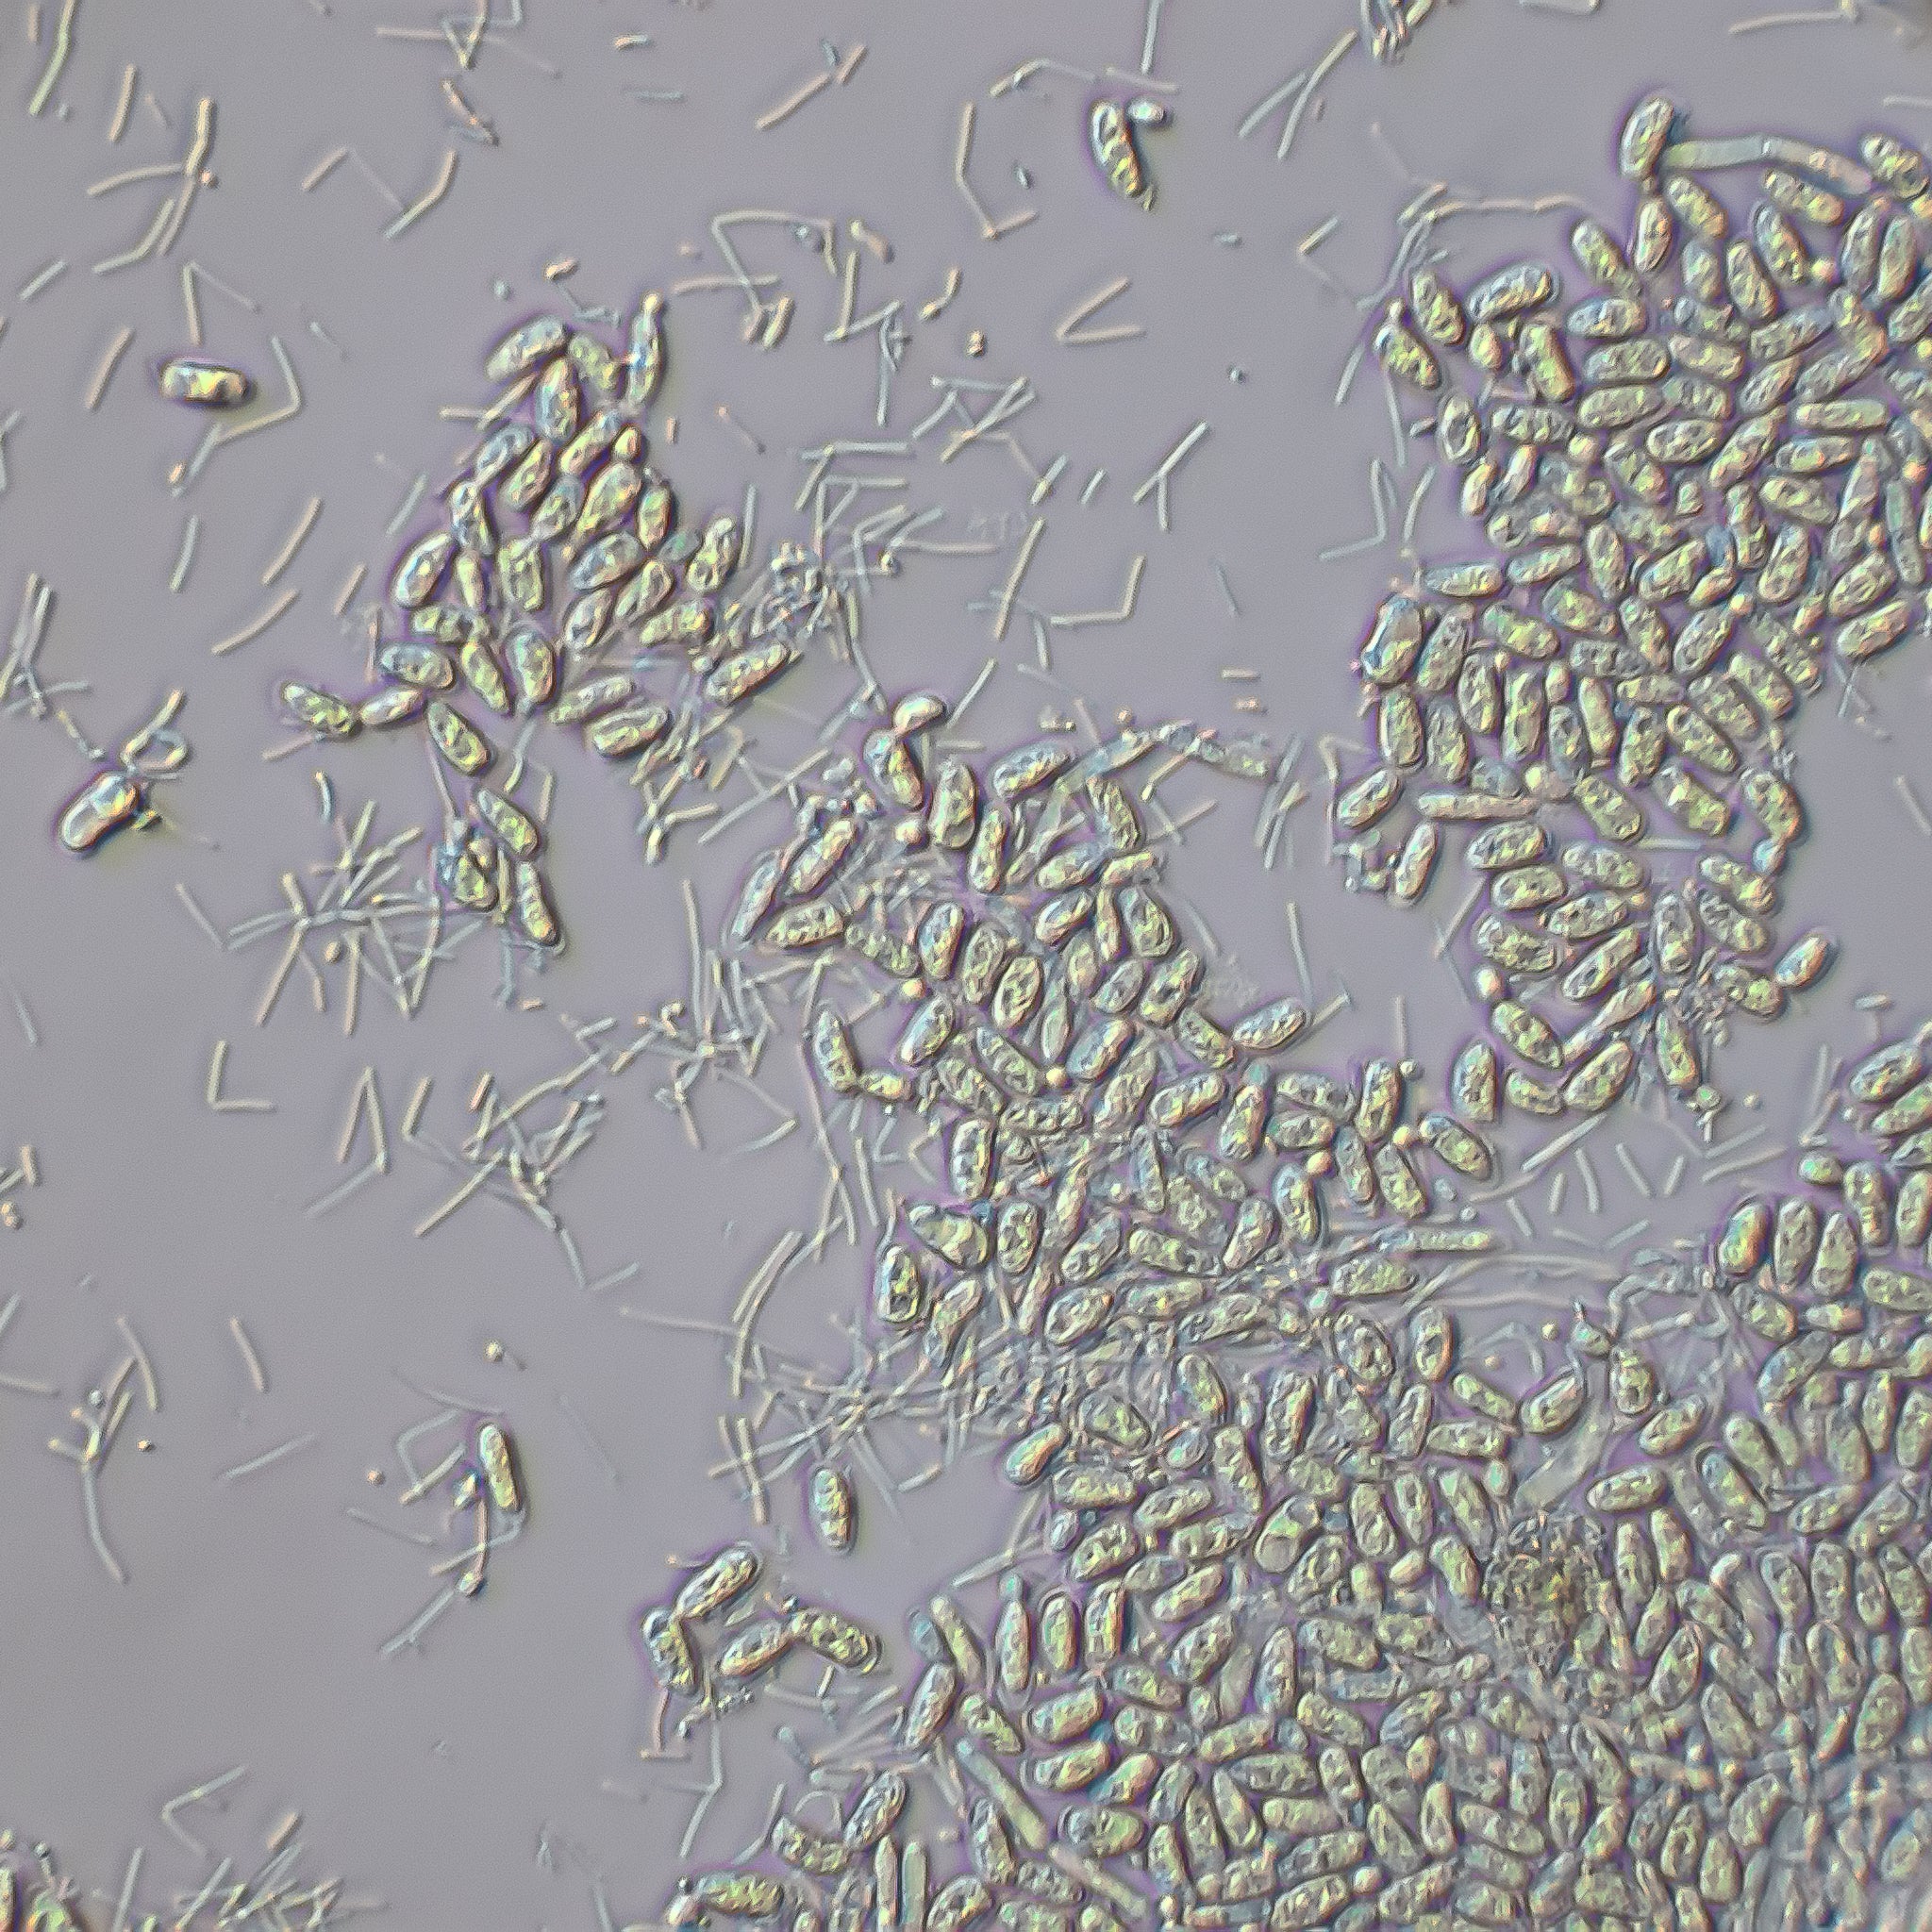 magnification of microbz sustain showing the living microbes 